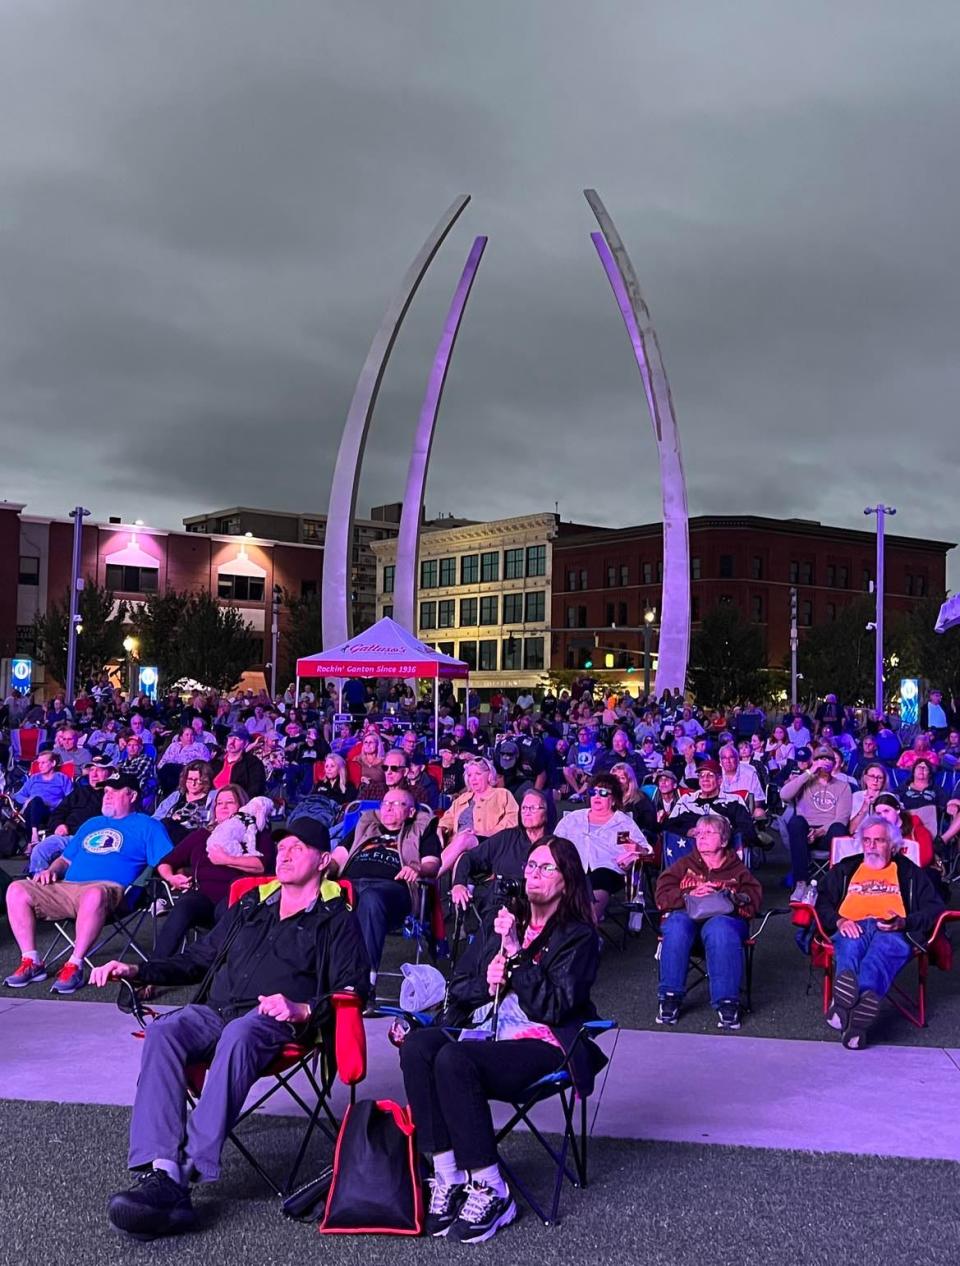 People packed Centennial Plaza on Friday night during a ZYGRT concert as part of the Downtown Canton Music Fest. ZYGRT is a tribute band that plays Led Zeppelin, Yes, Genesis, Rush and Toto songs.